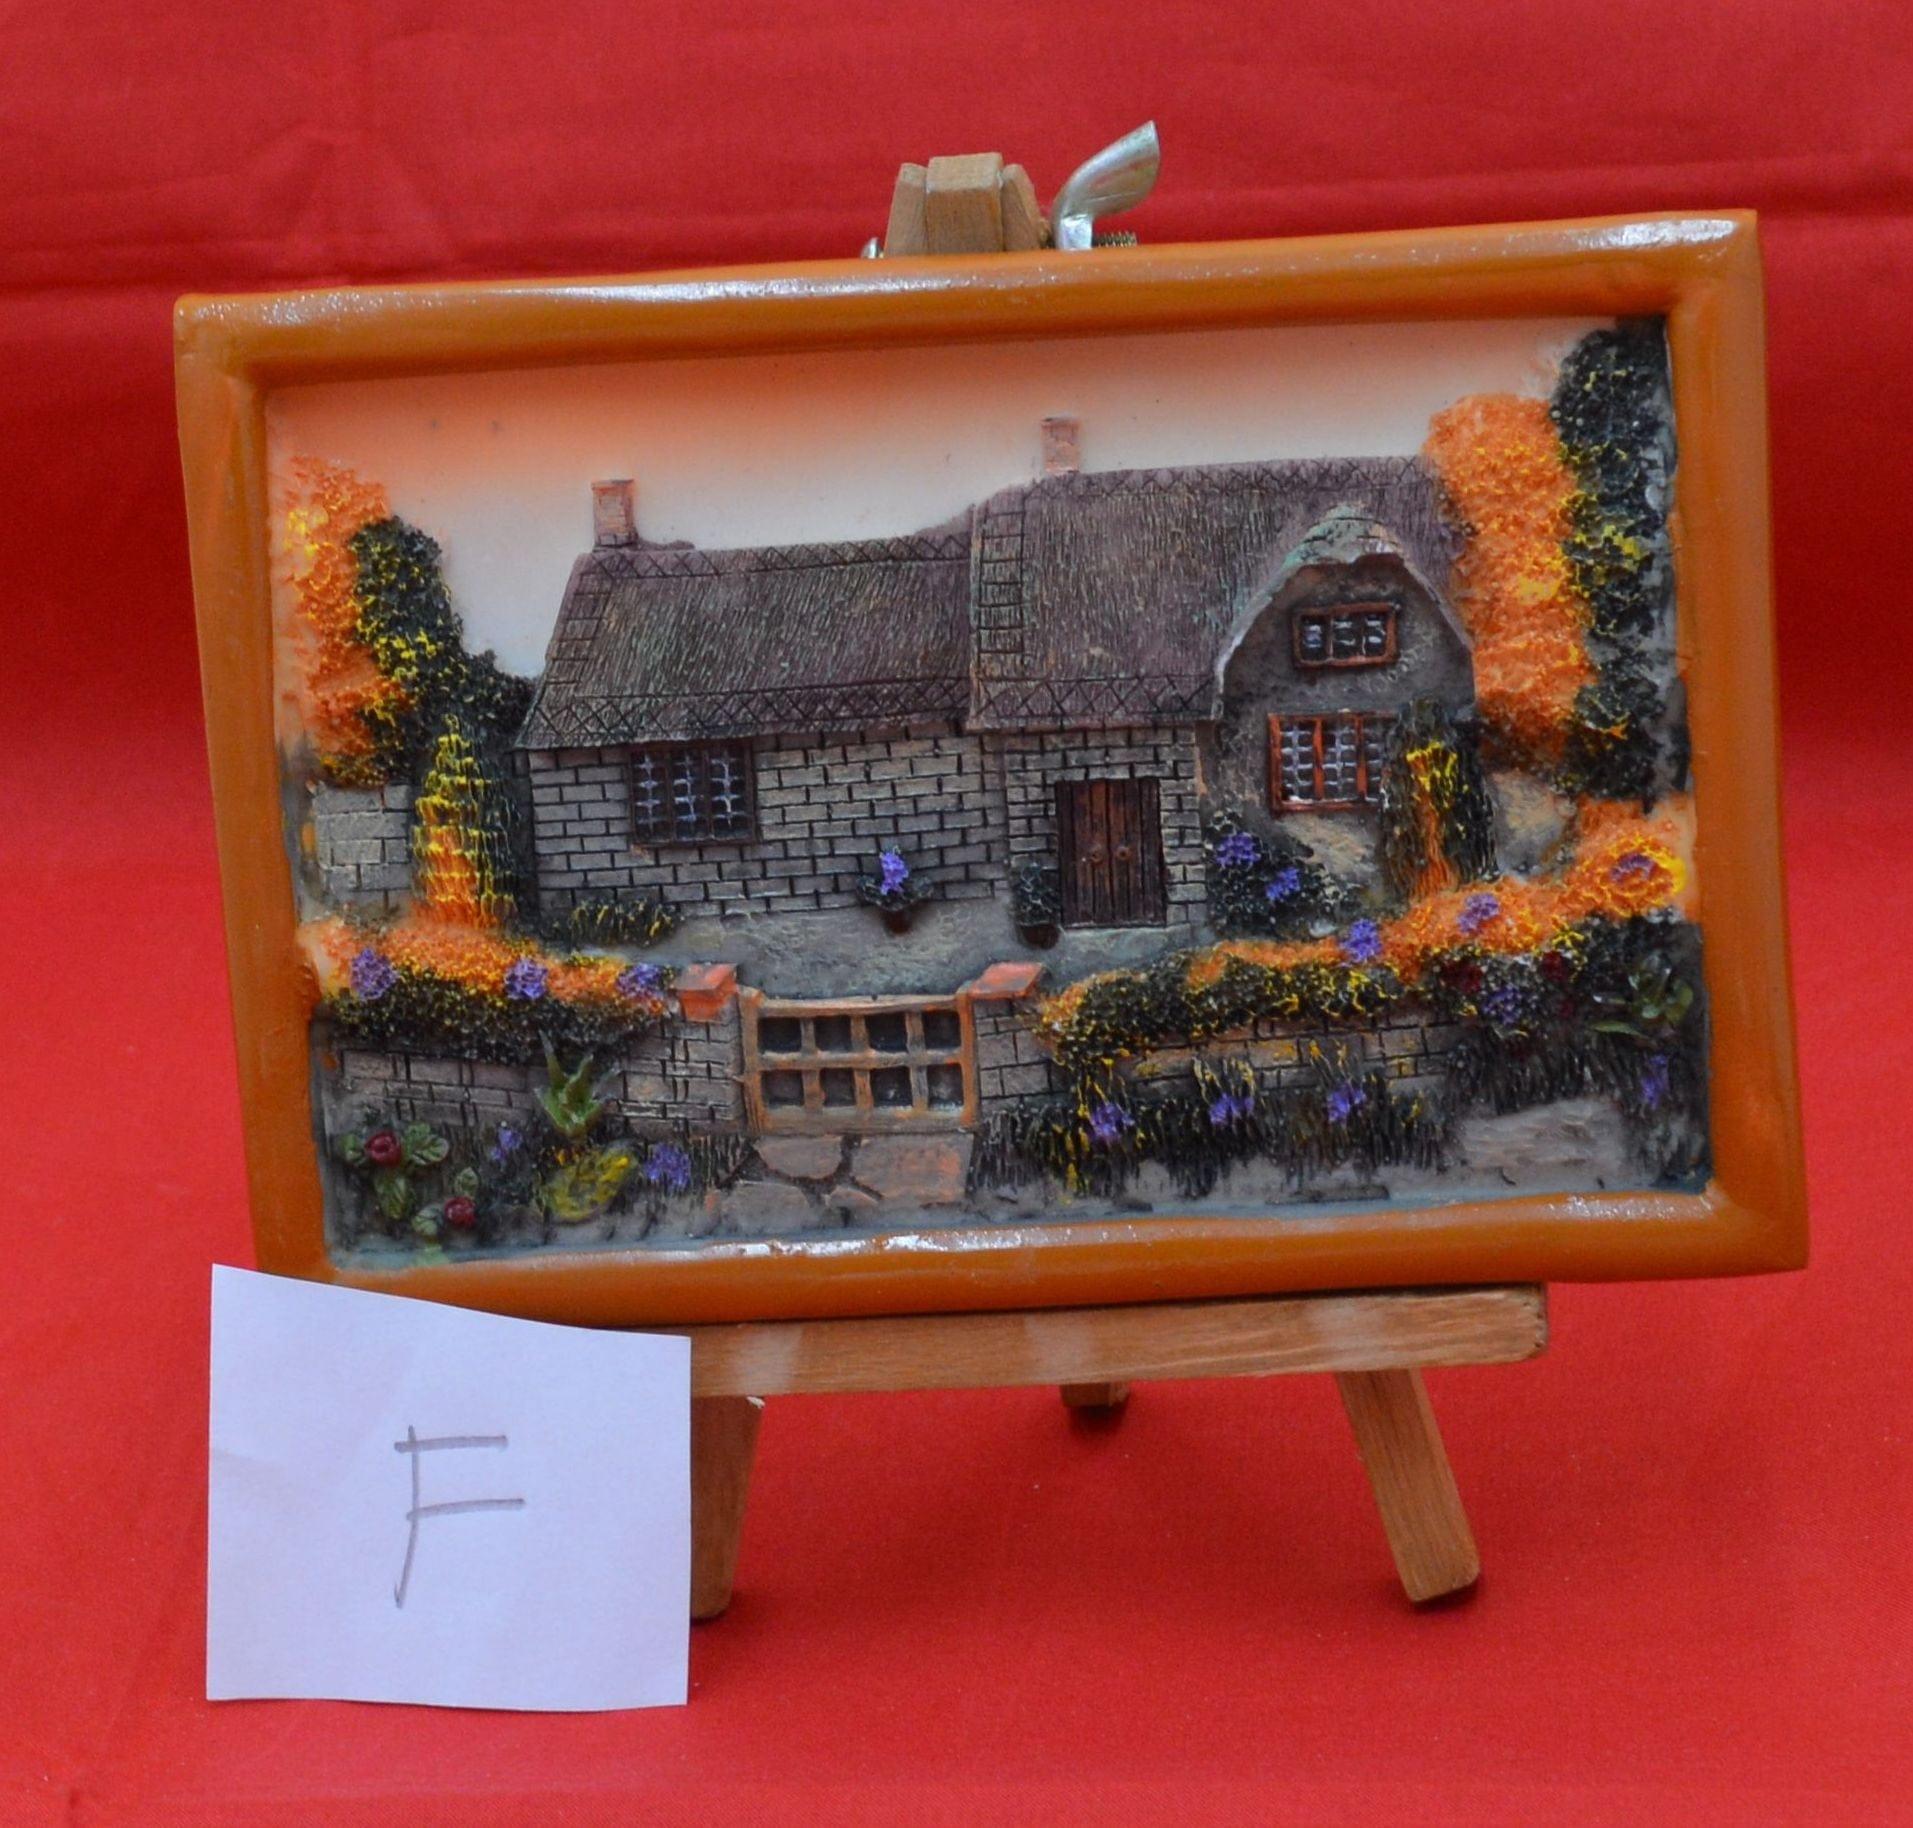 DECORATIVE ORNAMENT SCENIC RESIN PICTURE ON AN EASEL (PREVIOUSLY OWNED) GOOD CONDITION - TMD167207